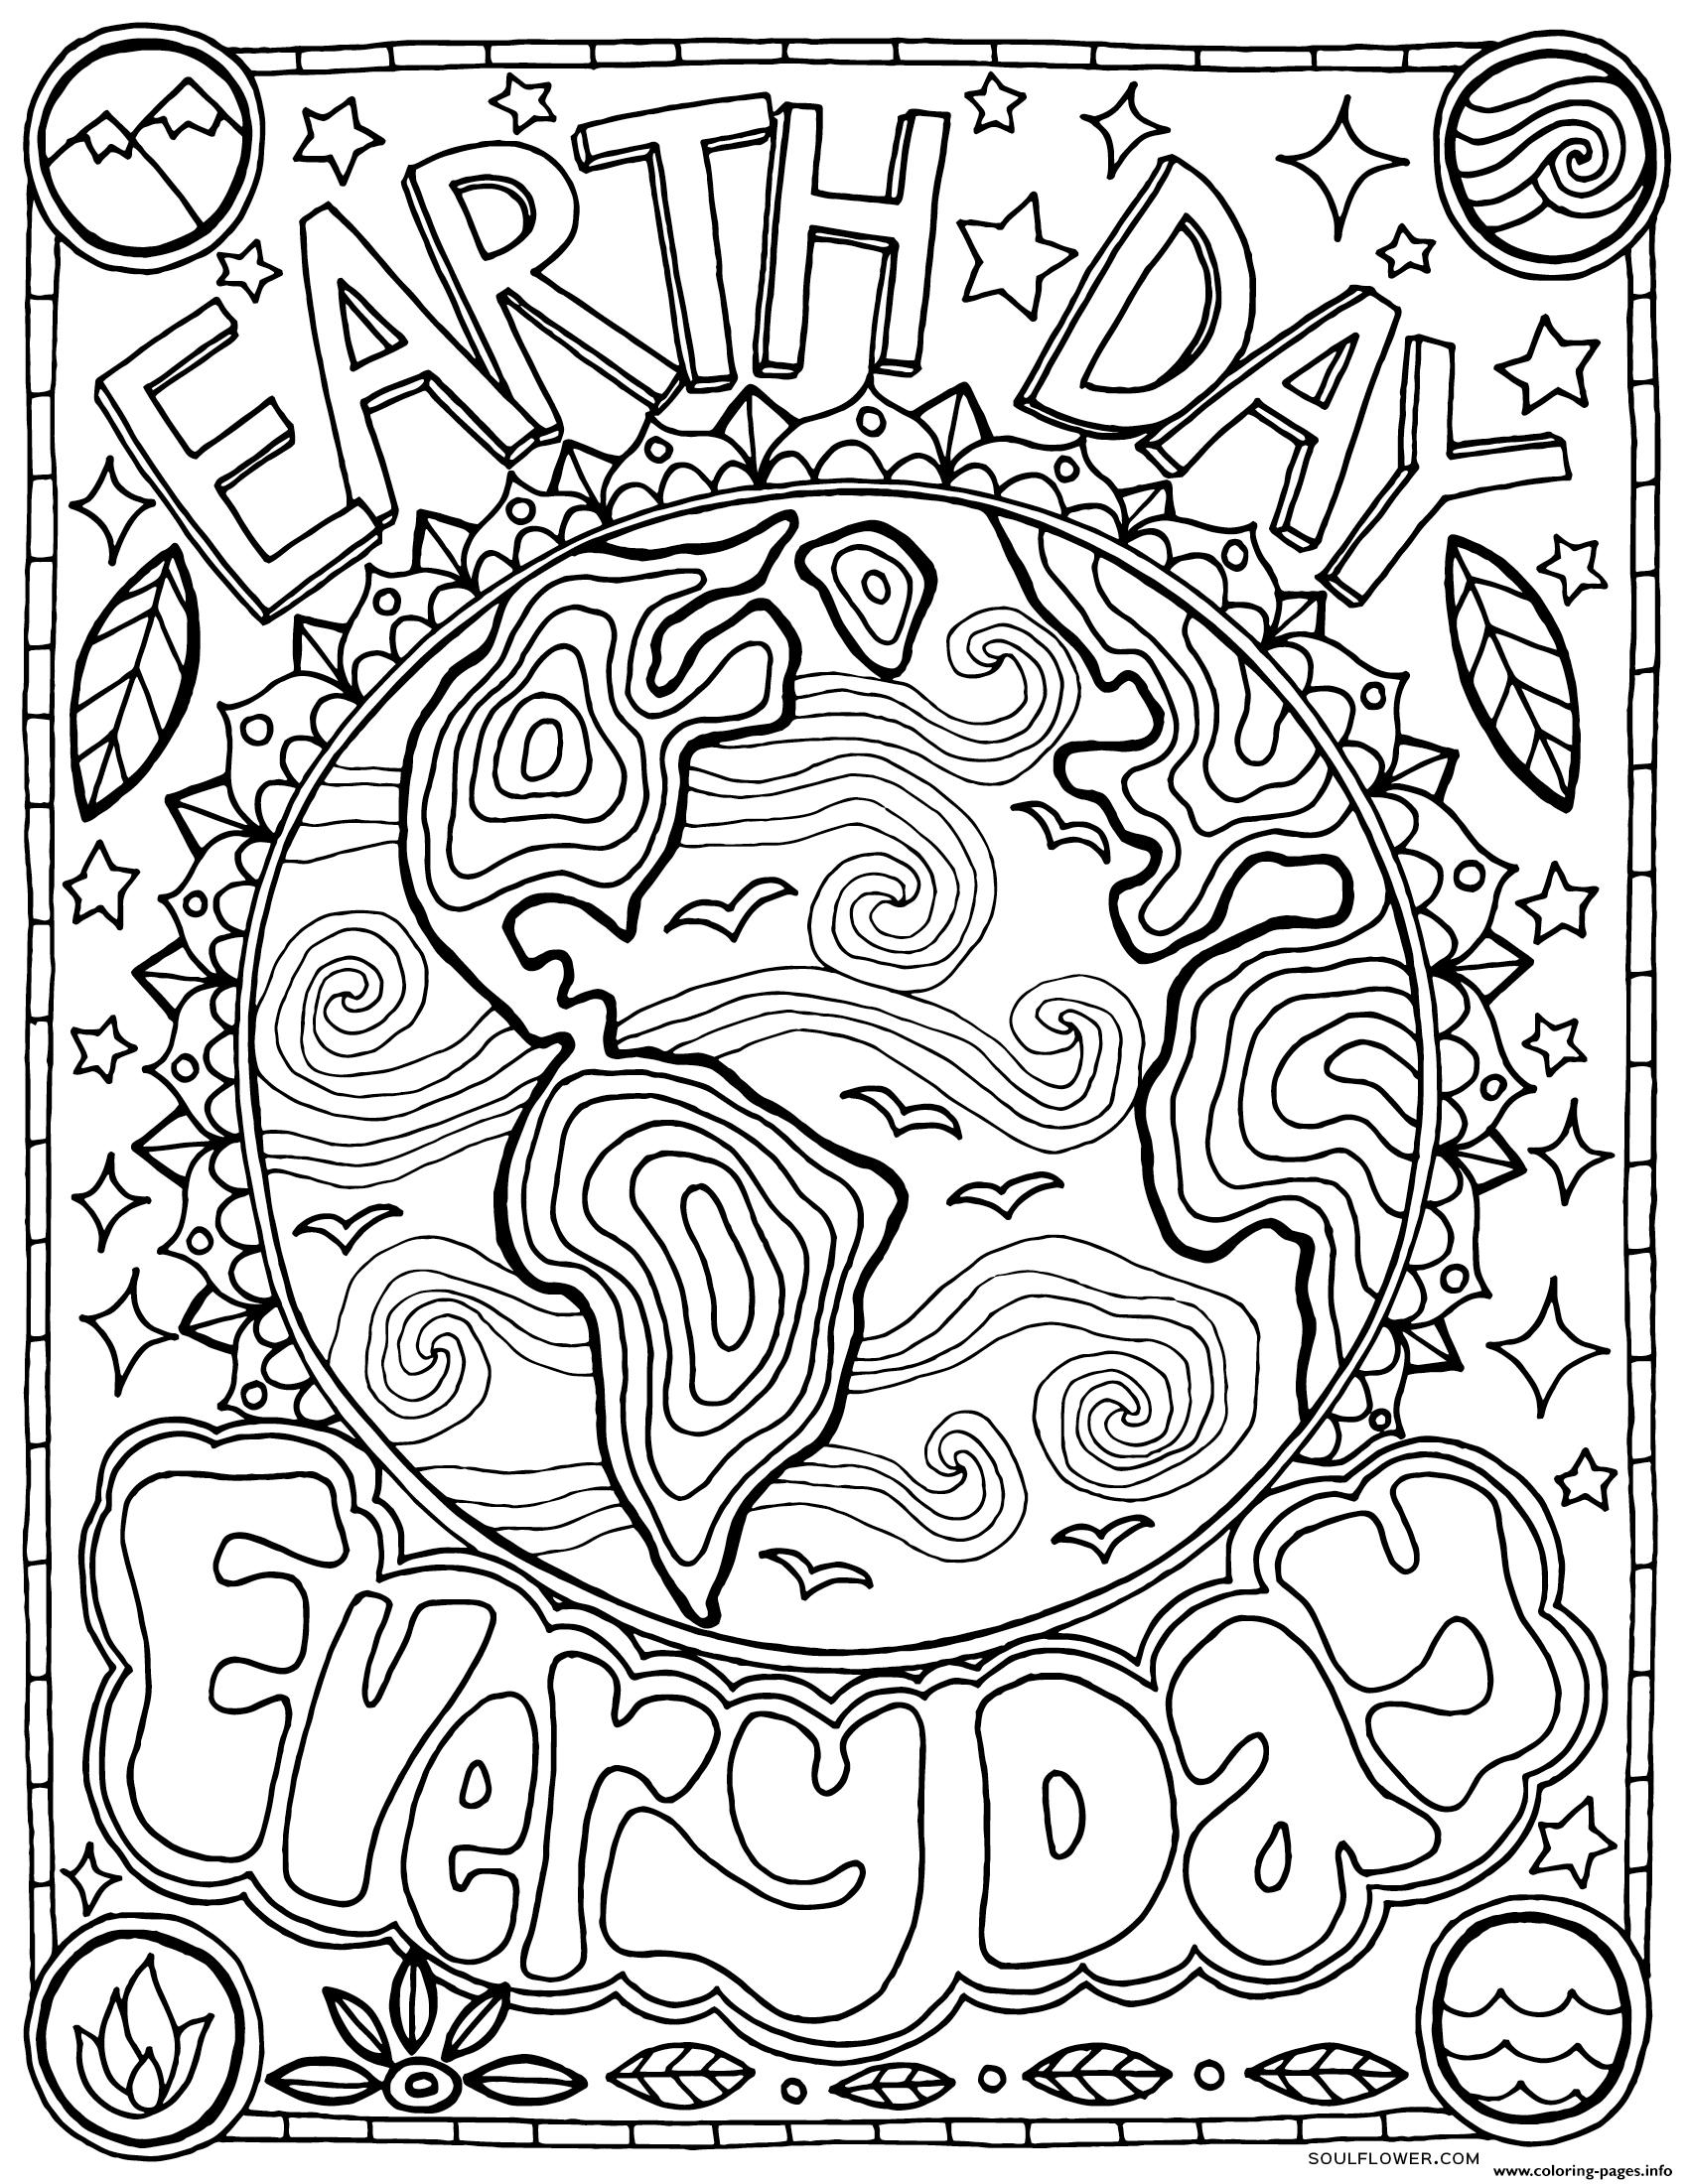 Earth Day Everyday coloring